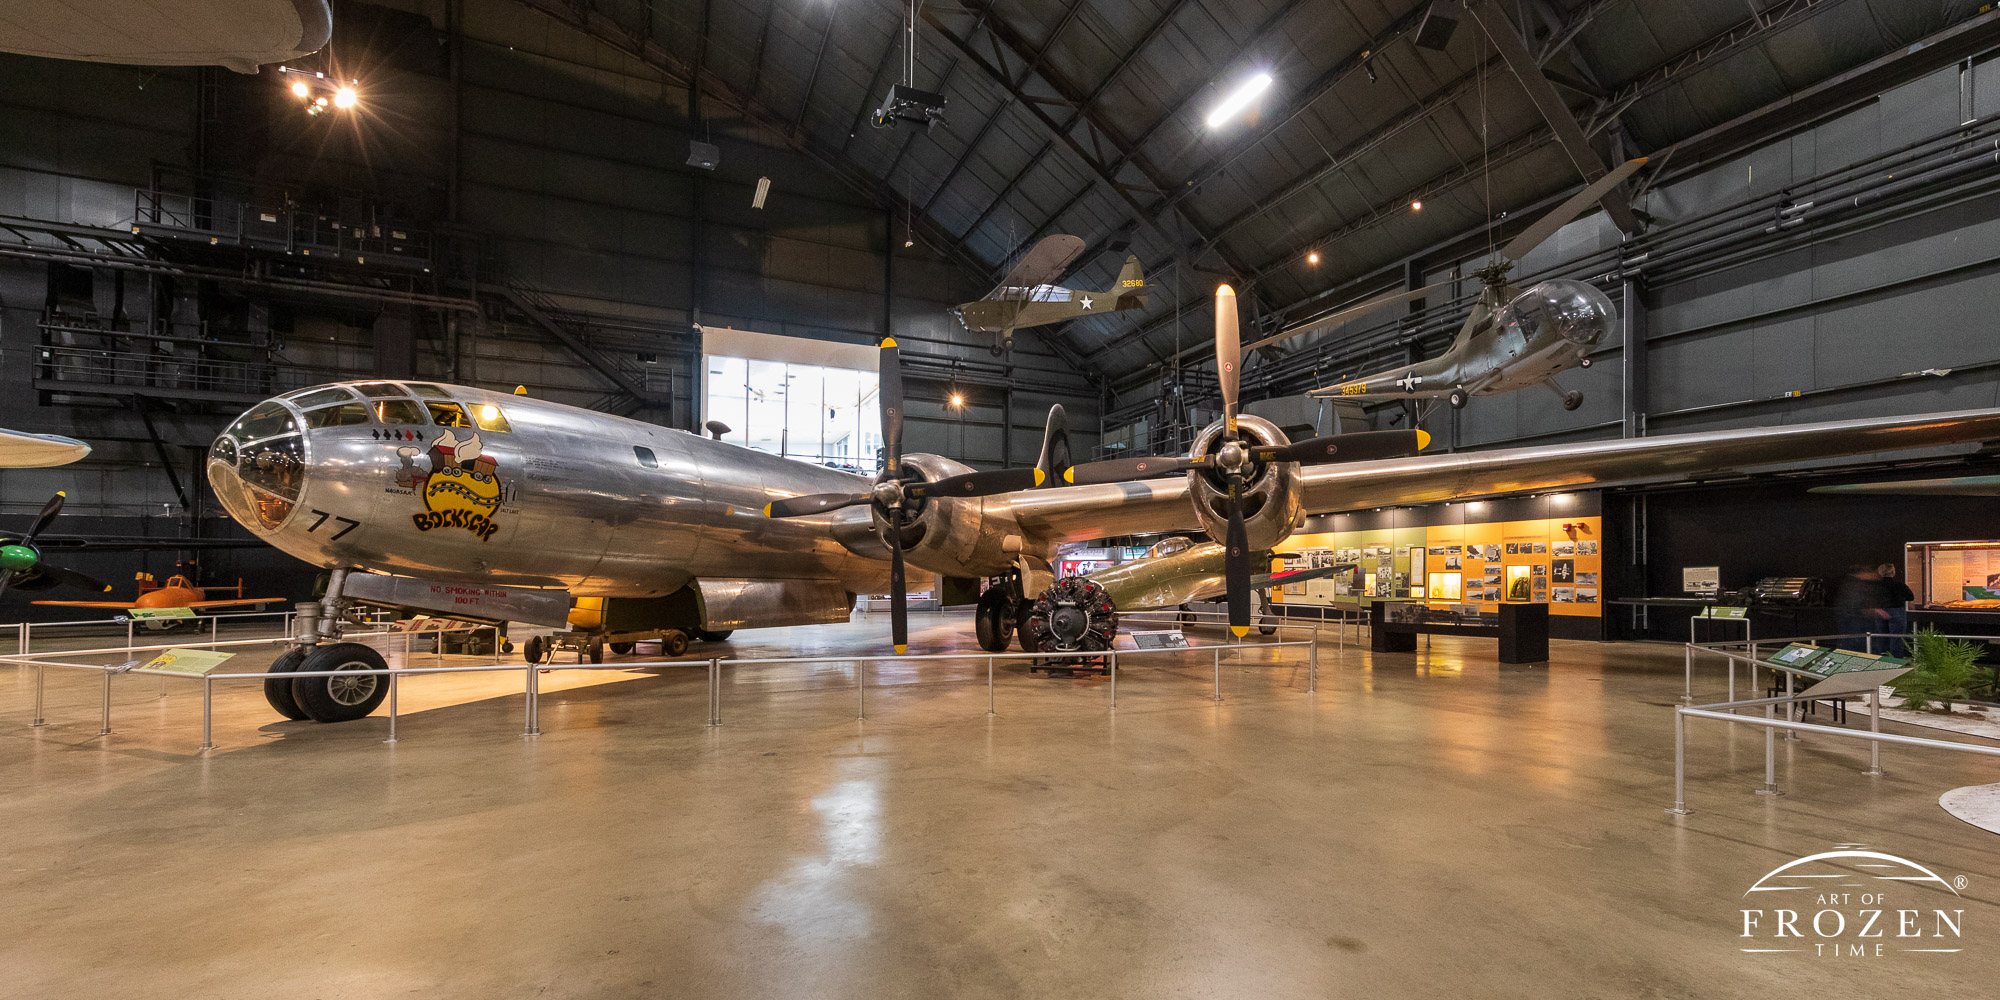 A panoramic view of a B-29 Bomber featuring its bare aluminum skin and classic nose art as it sits inside the National Museum of the US Air Force